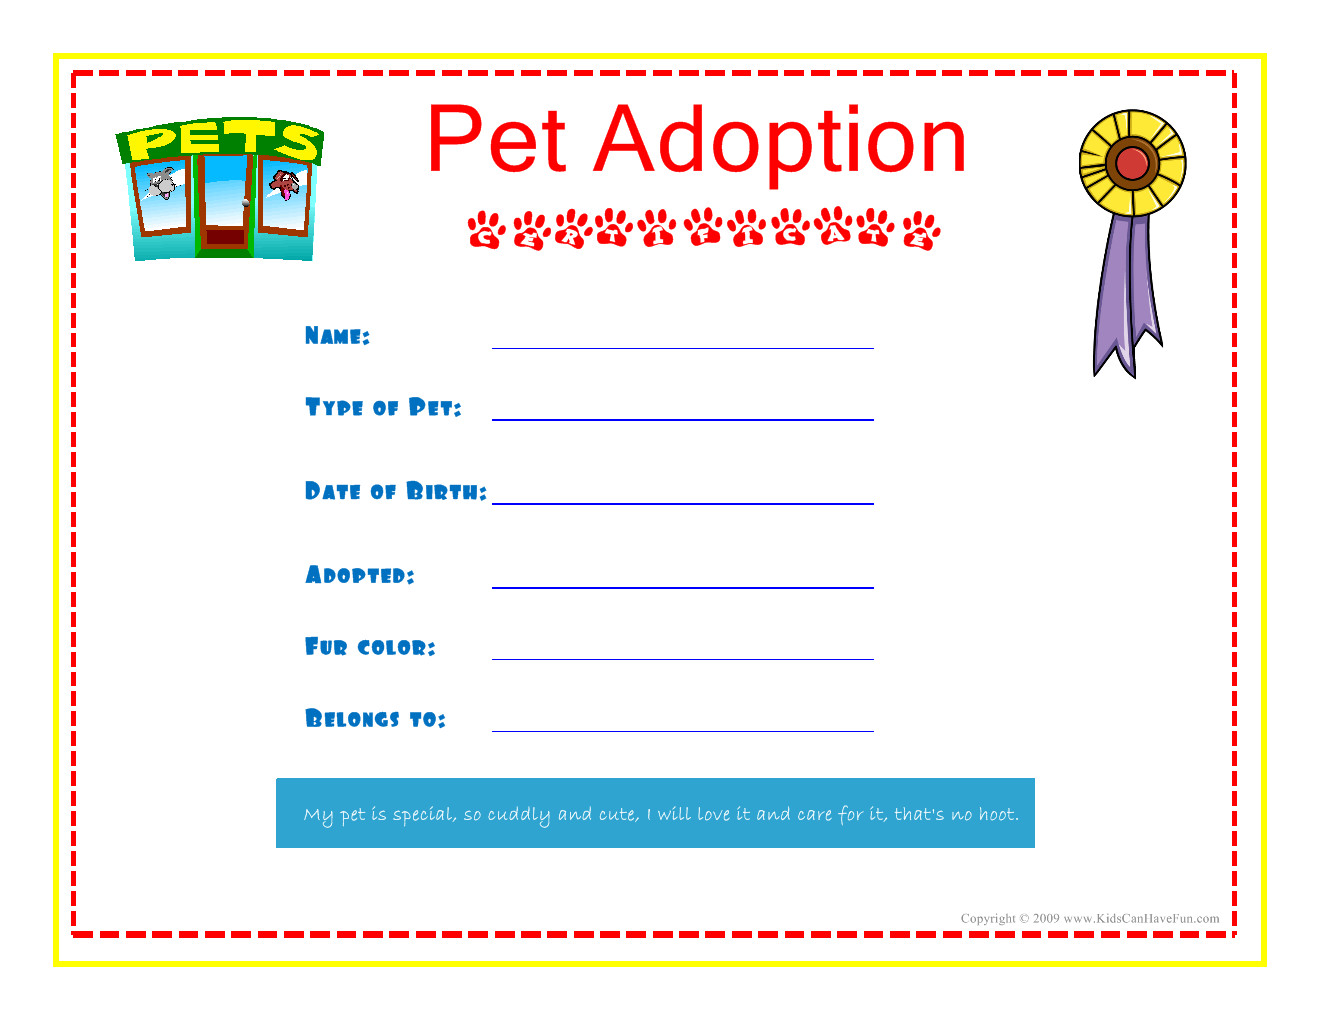 Pet Adoption Certificate for the kids to fill out about